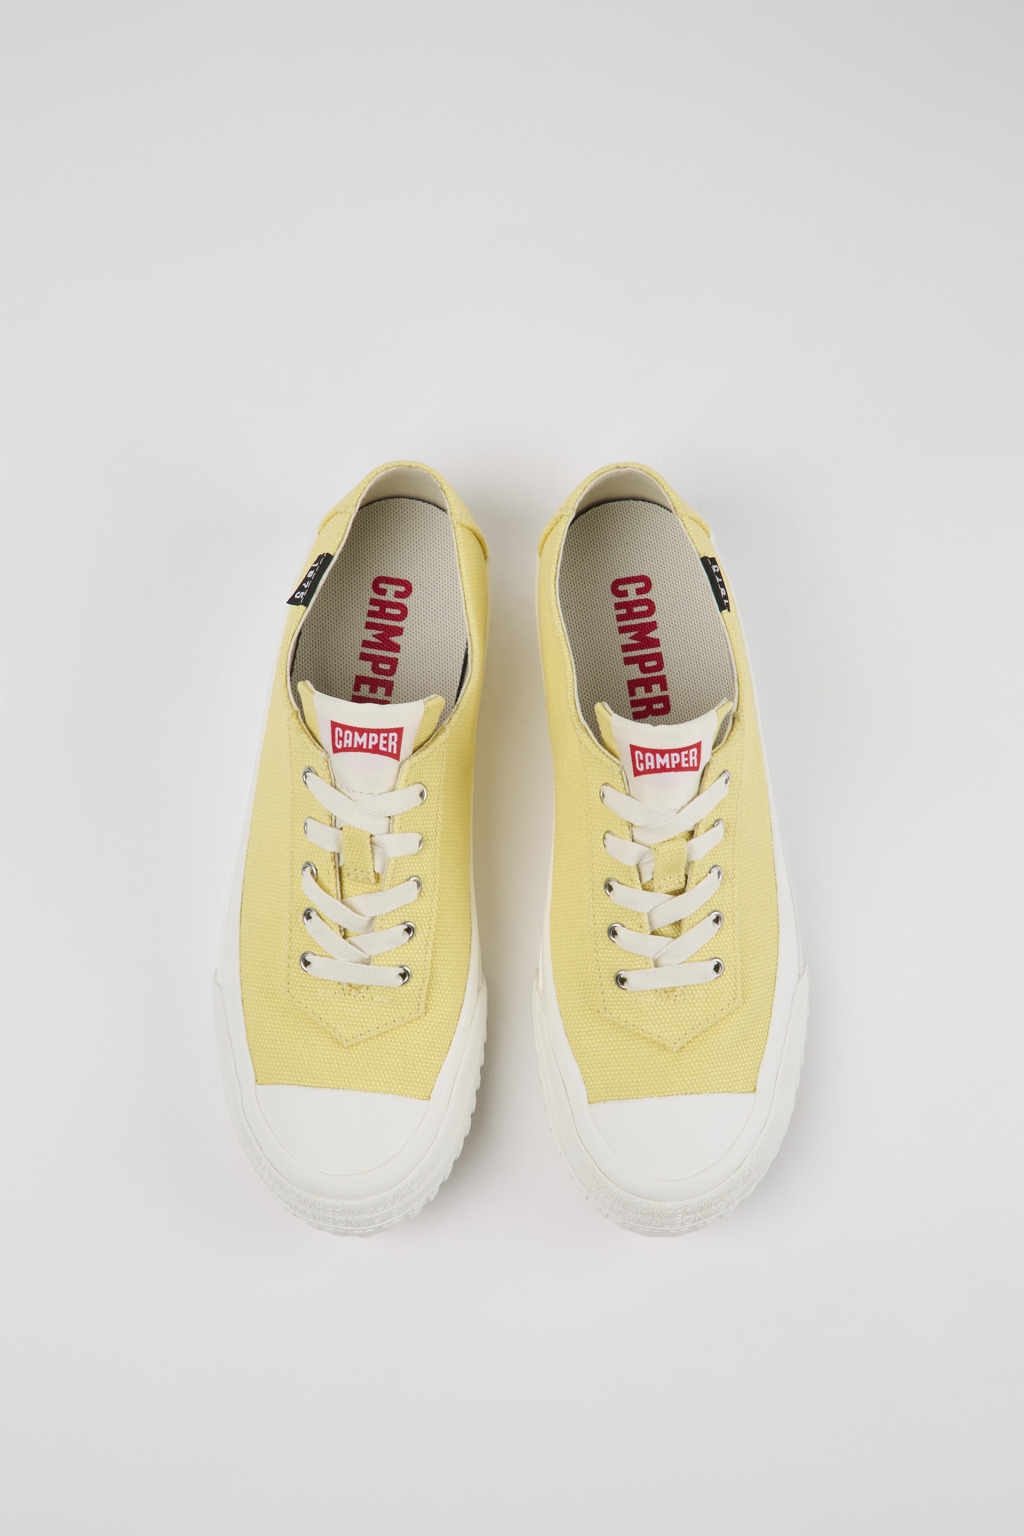 camaleon Yellow Sneakers for Women - Spring/Summer collection 